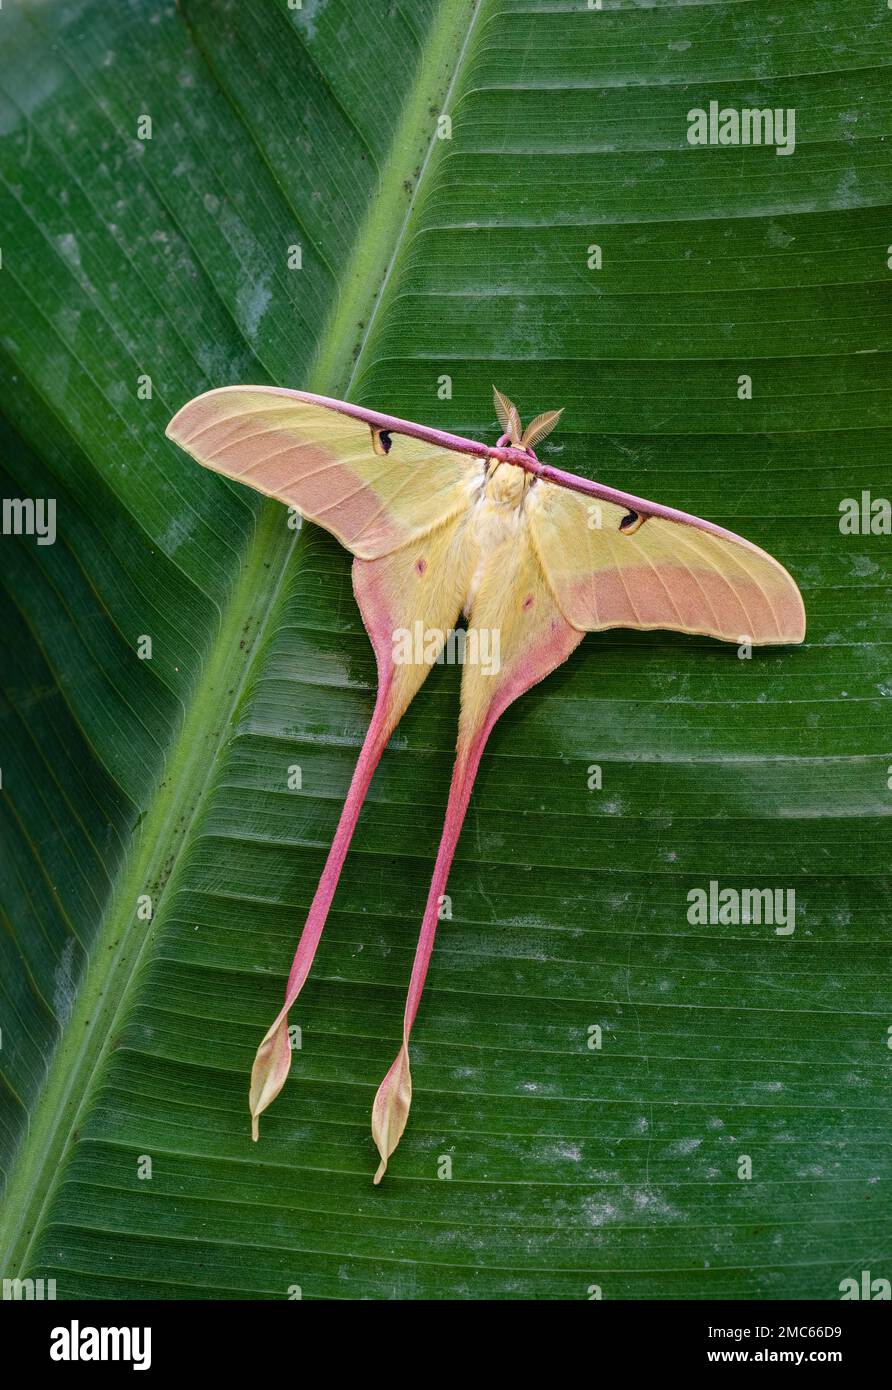 Chinese Moon Moth (Actias dubernardi)  There are a number of different species that come under the umbrella common name CHINESE MOON MOTH. Stock Photo